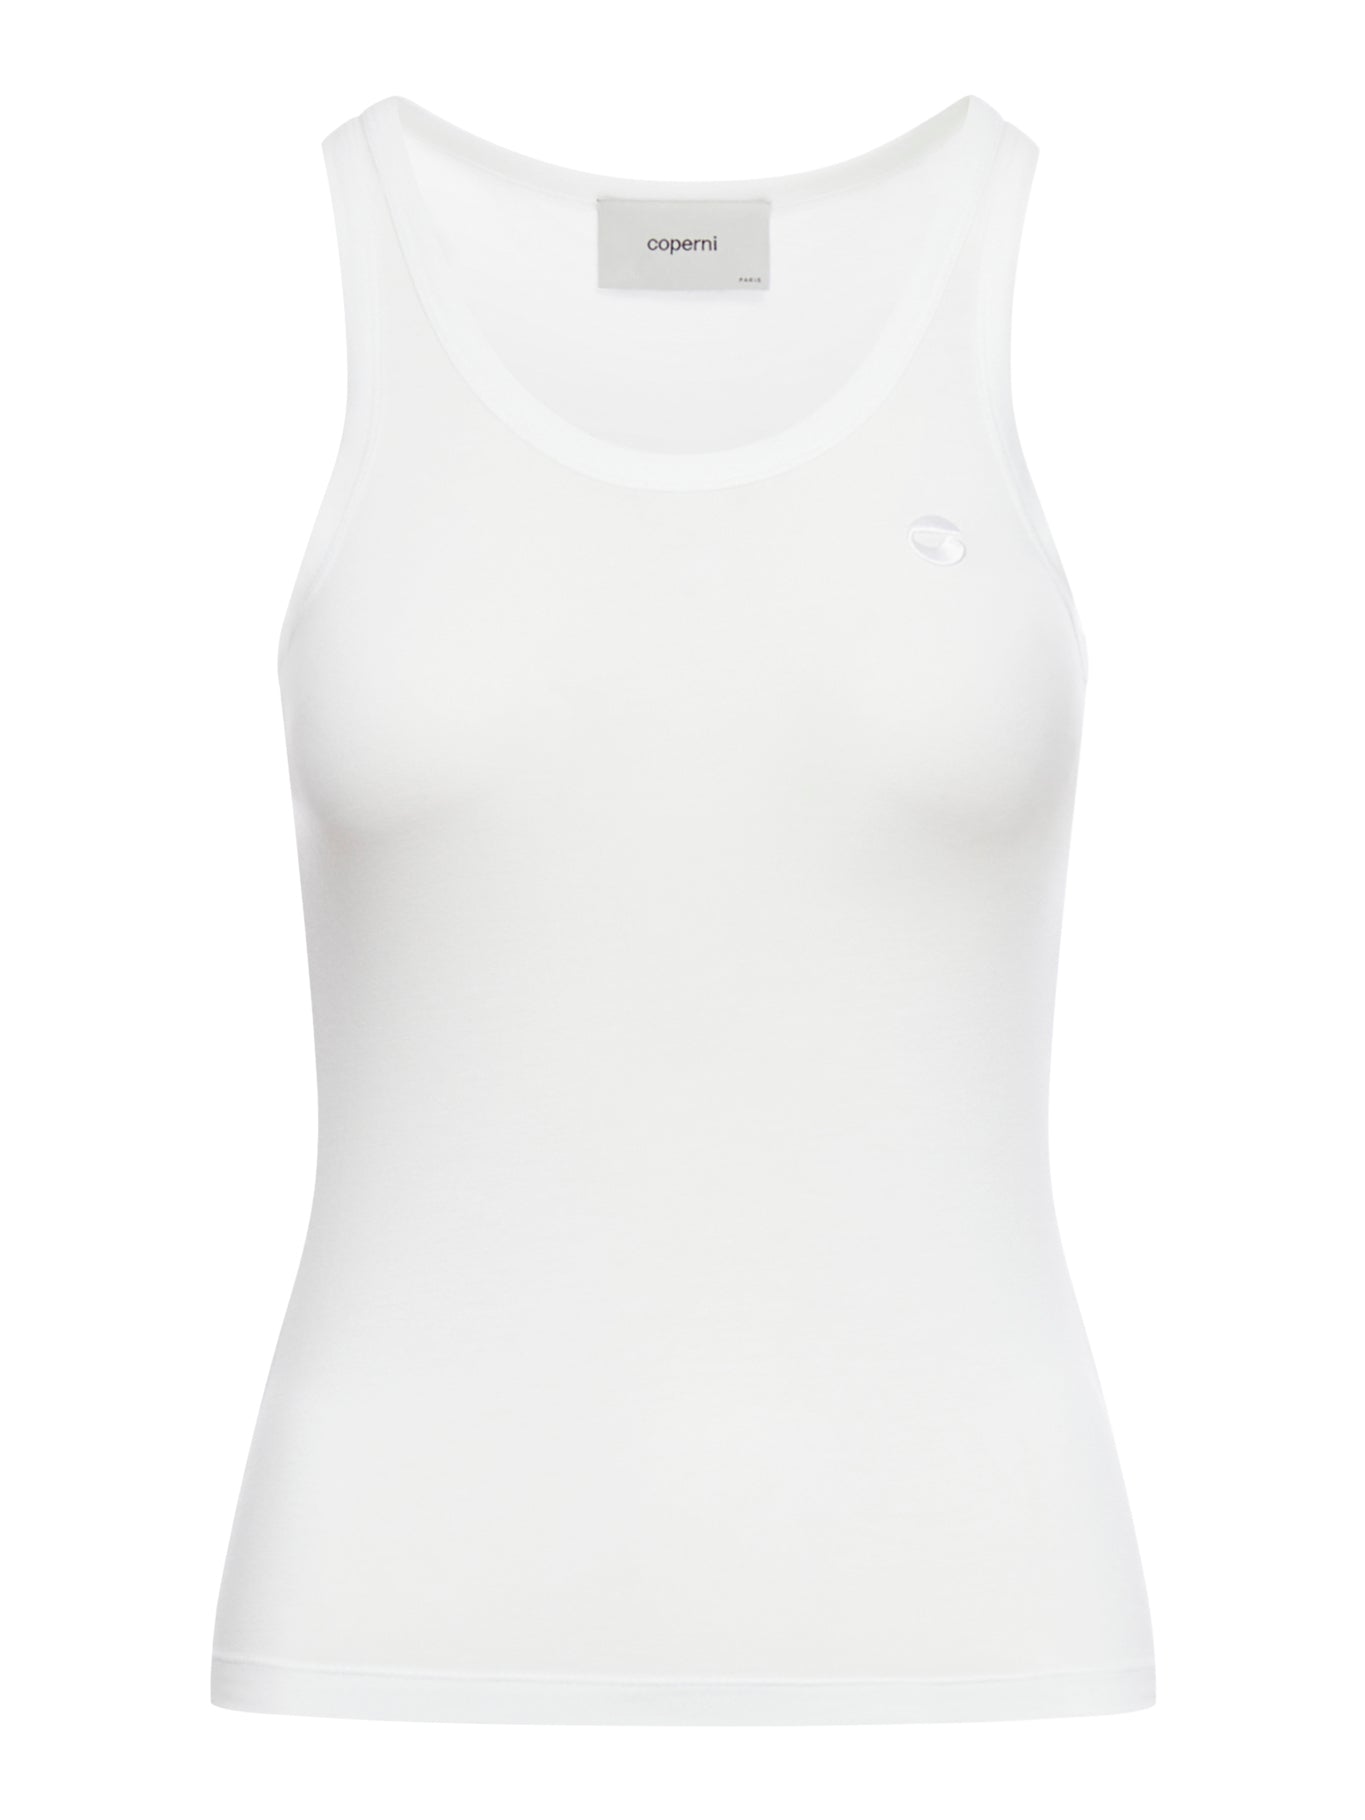 JERSEY TANK TOP WITH EMBROIDERED LOGO